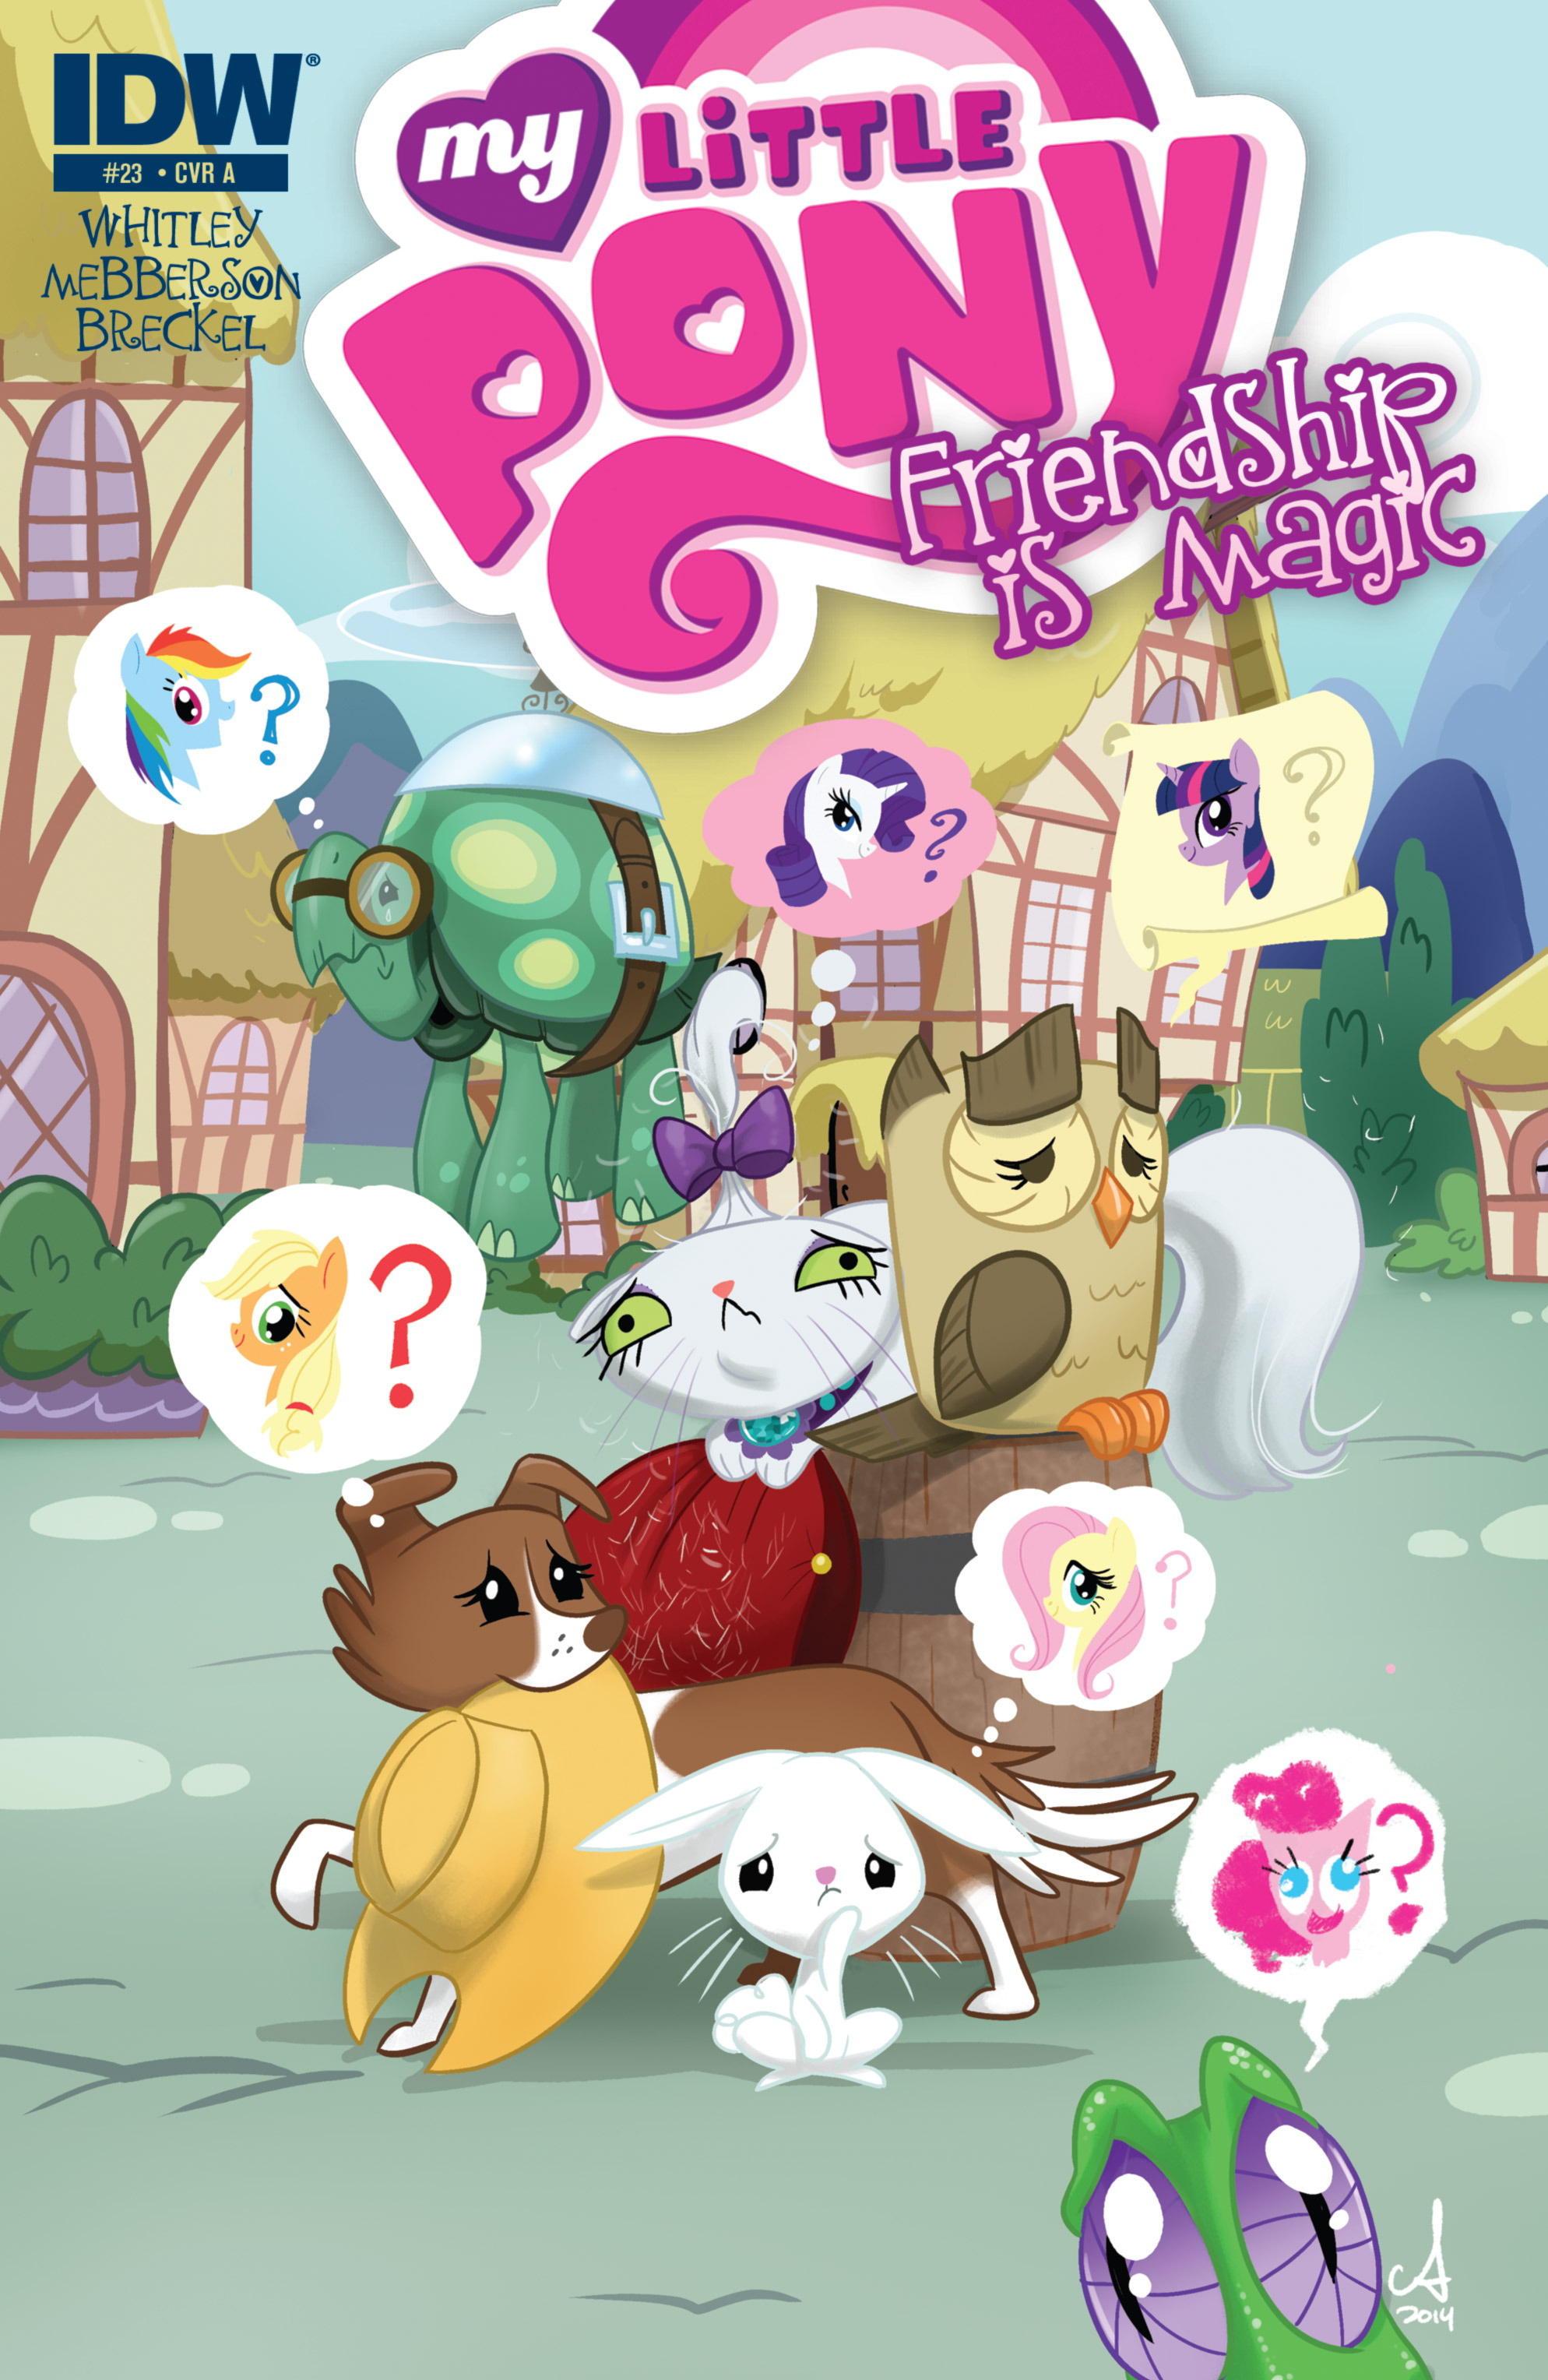 Read online My Little Pony: Friendship is Magic comic -  Issue #23 - 1